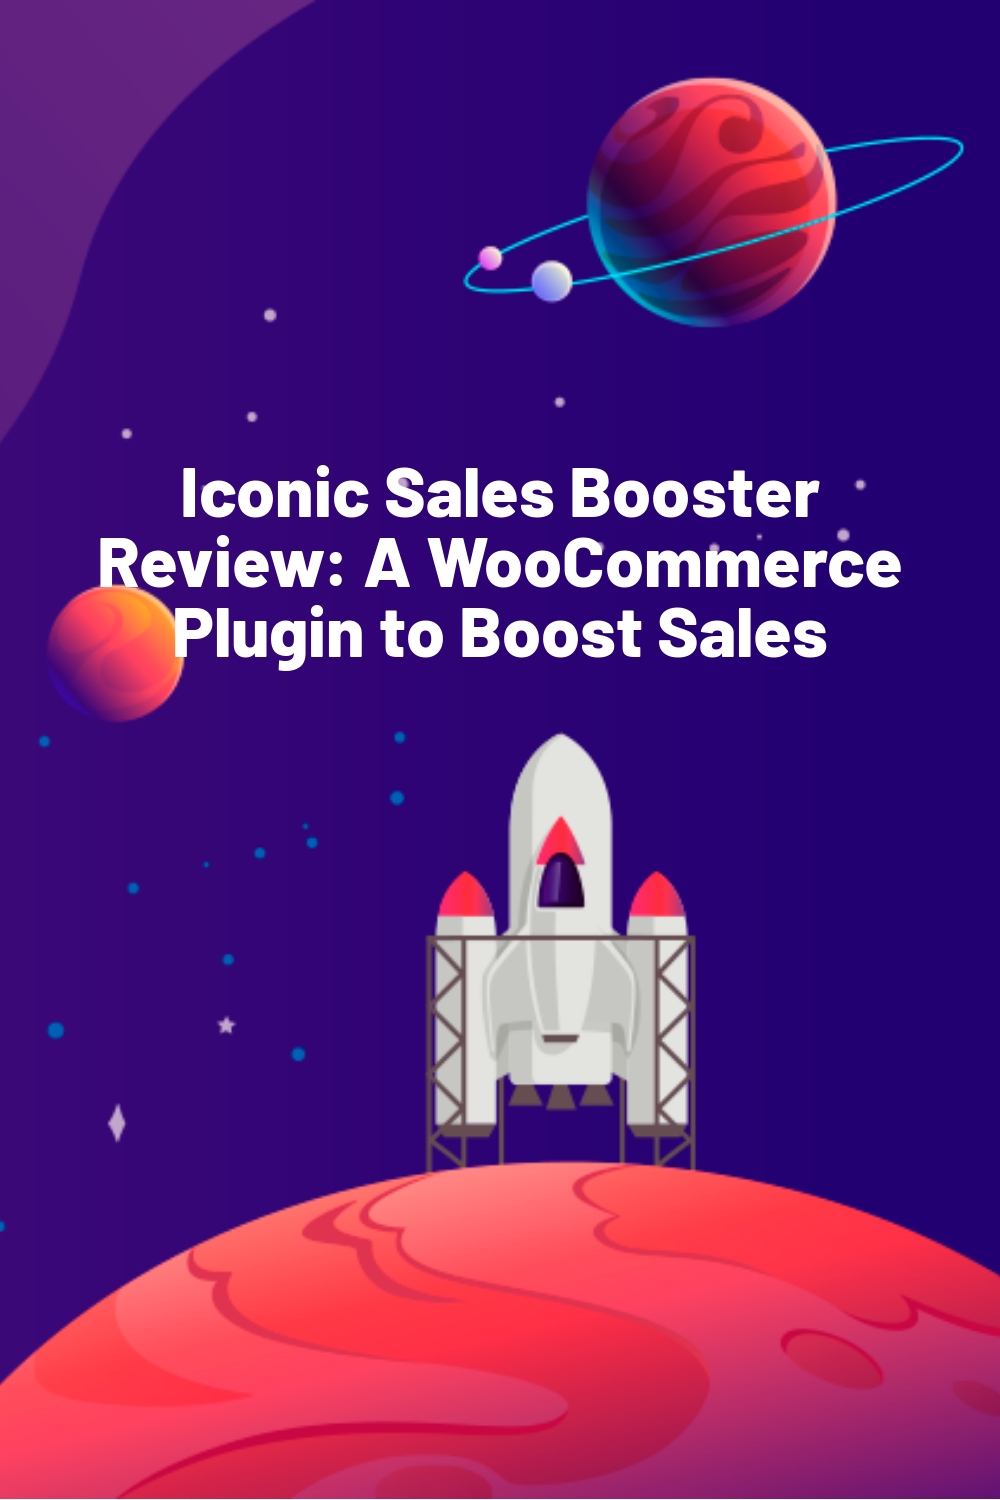 Iconic Sales Booster Review: A WooCommerce Plugin to Boost Sales